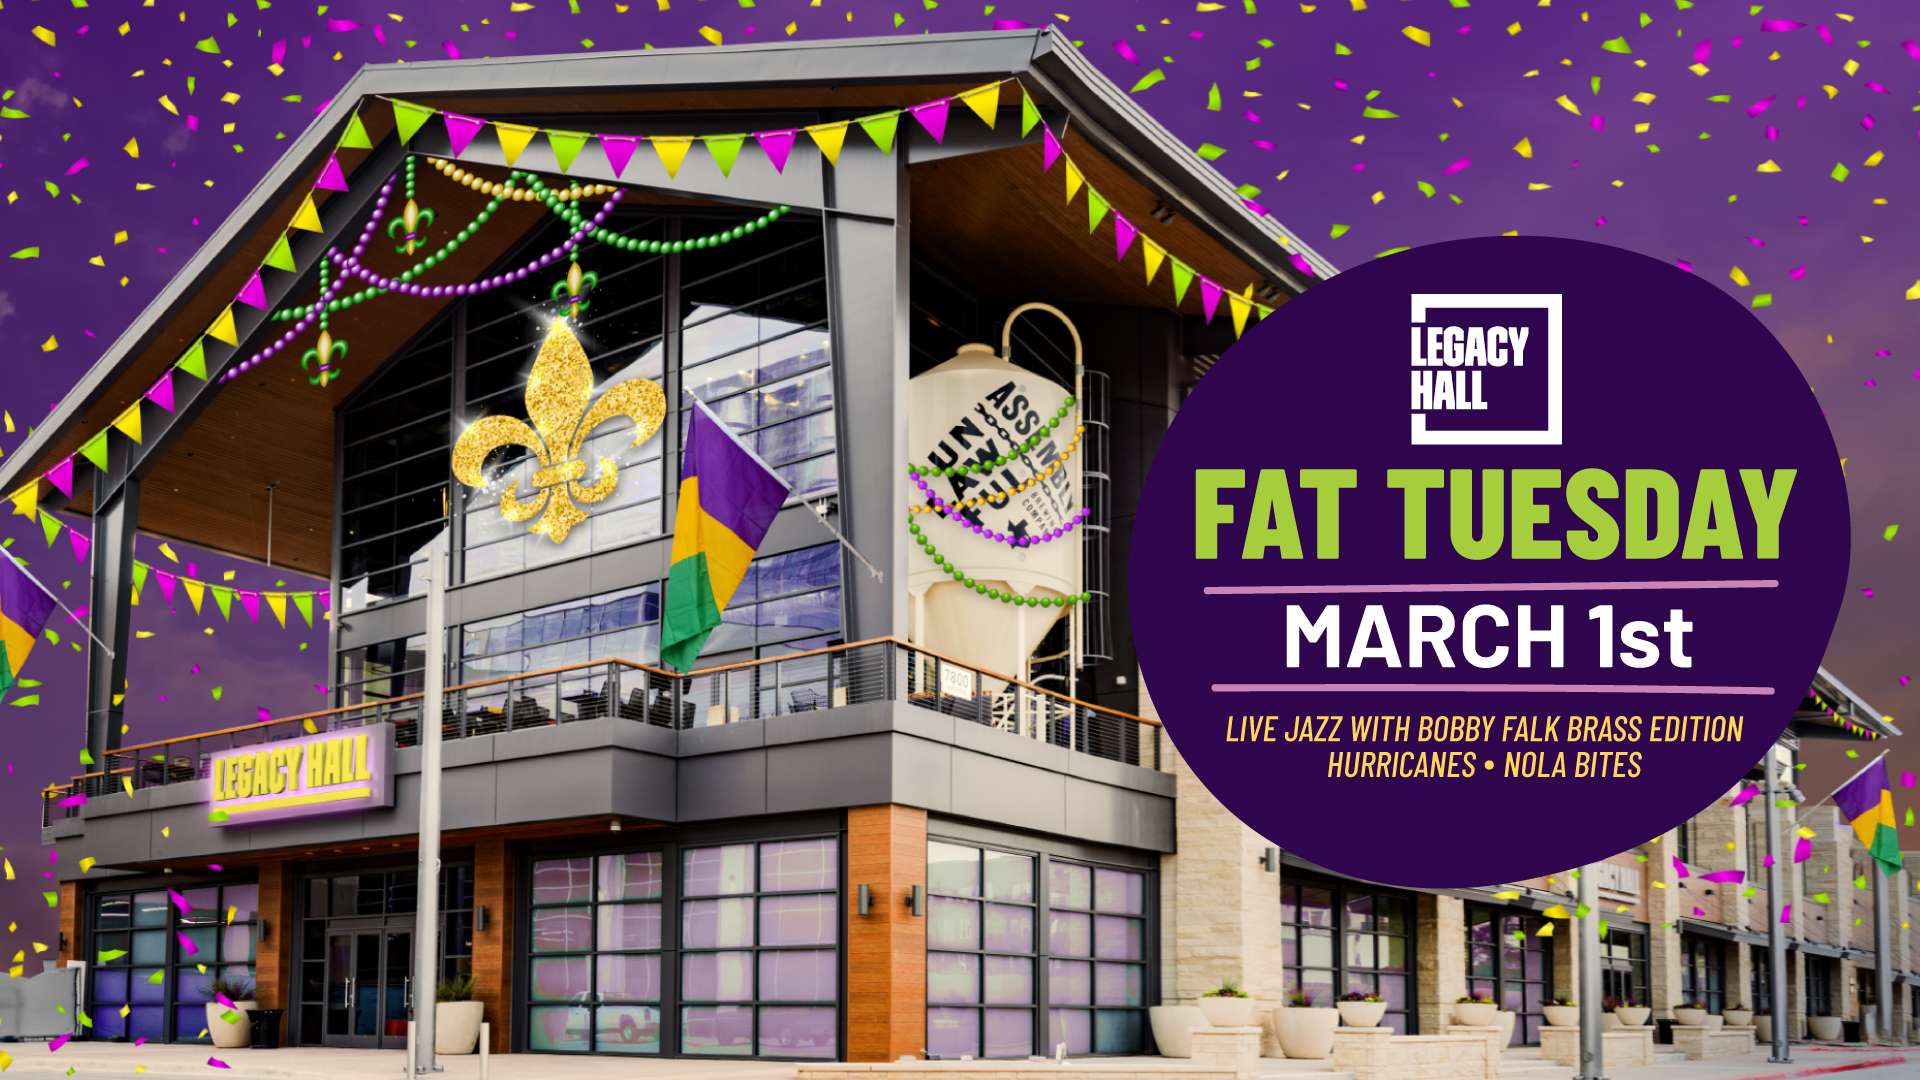 Fat Tuesday 2022 at LH Facebook Image